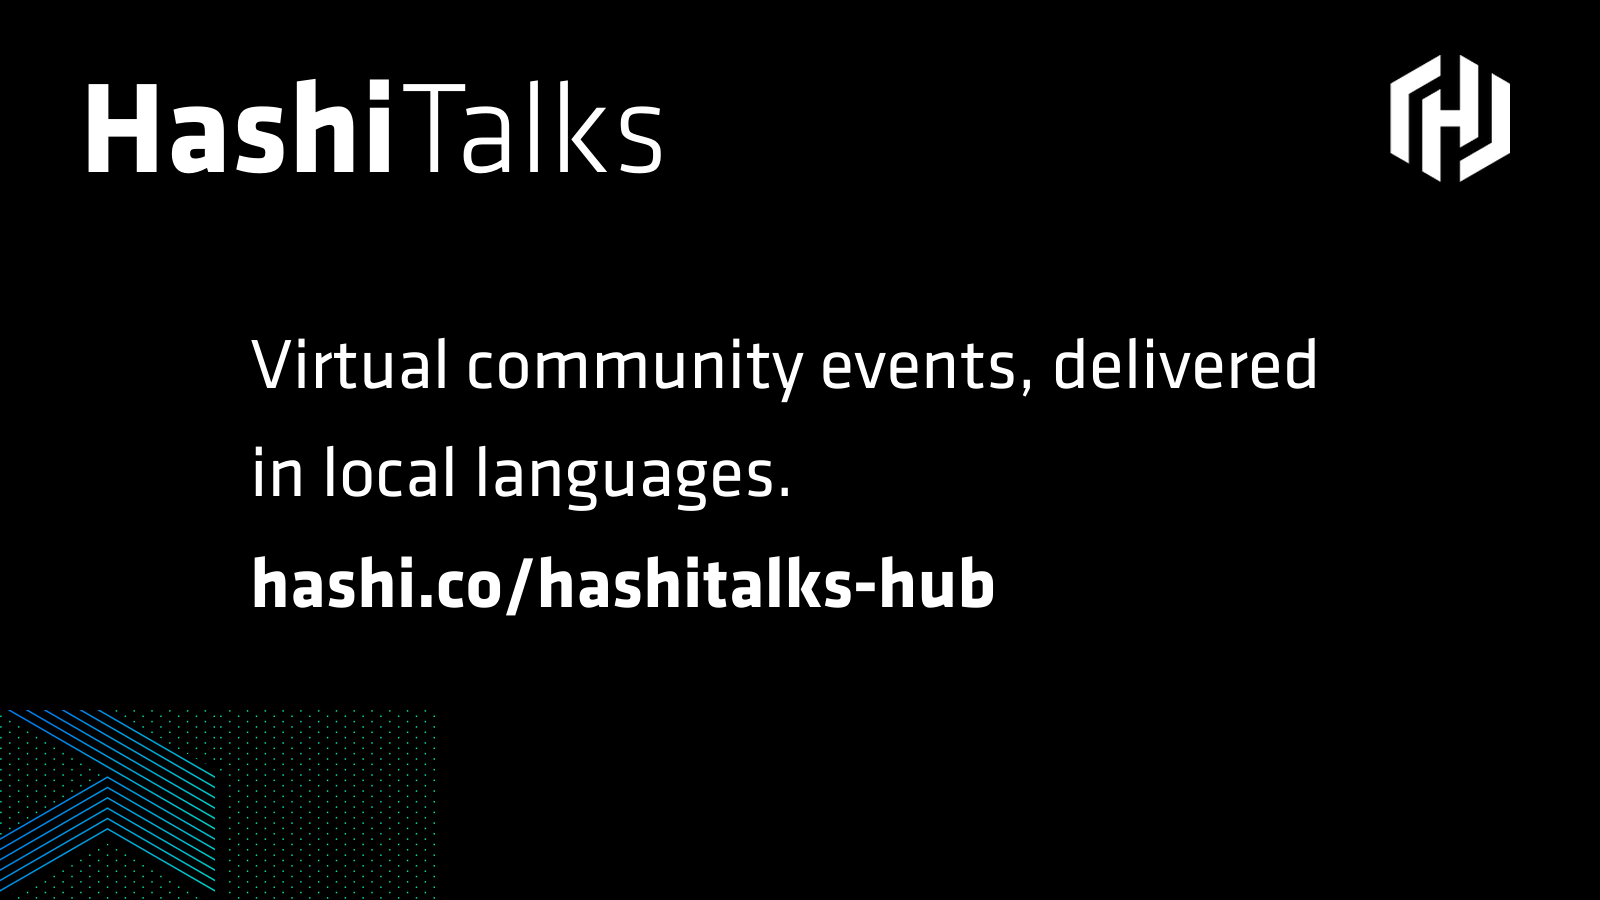 Virtual community events, delivered in local languages.